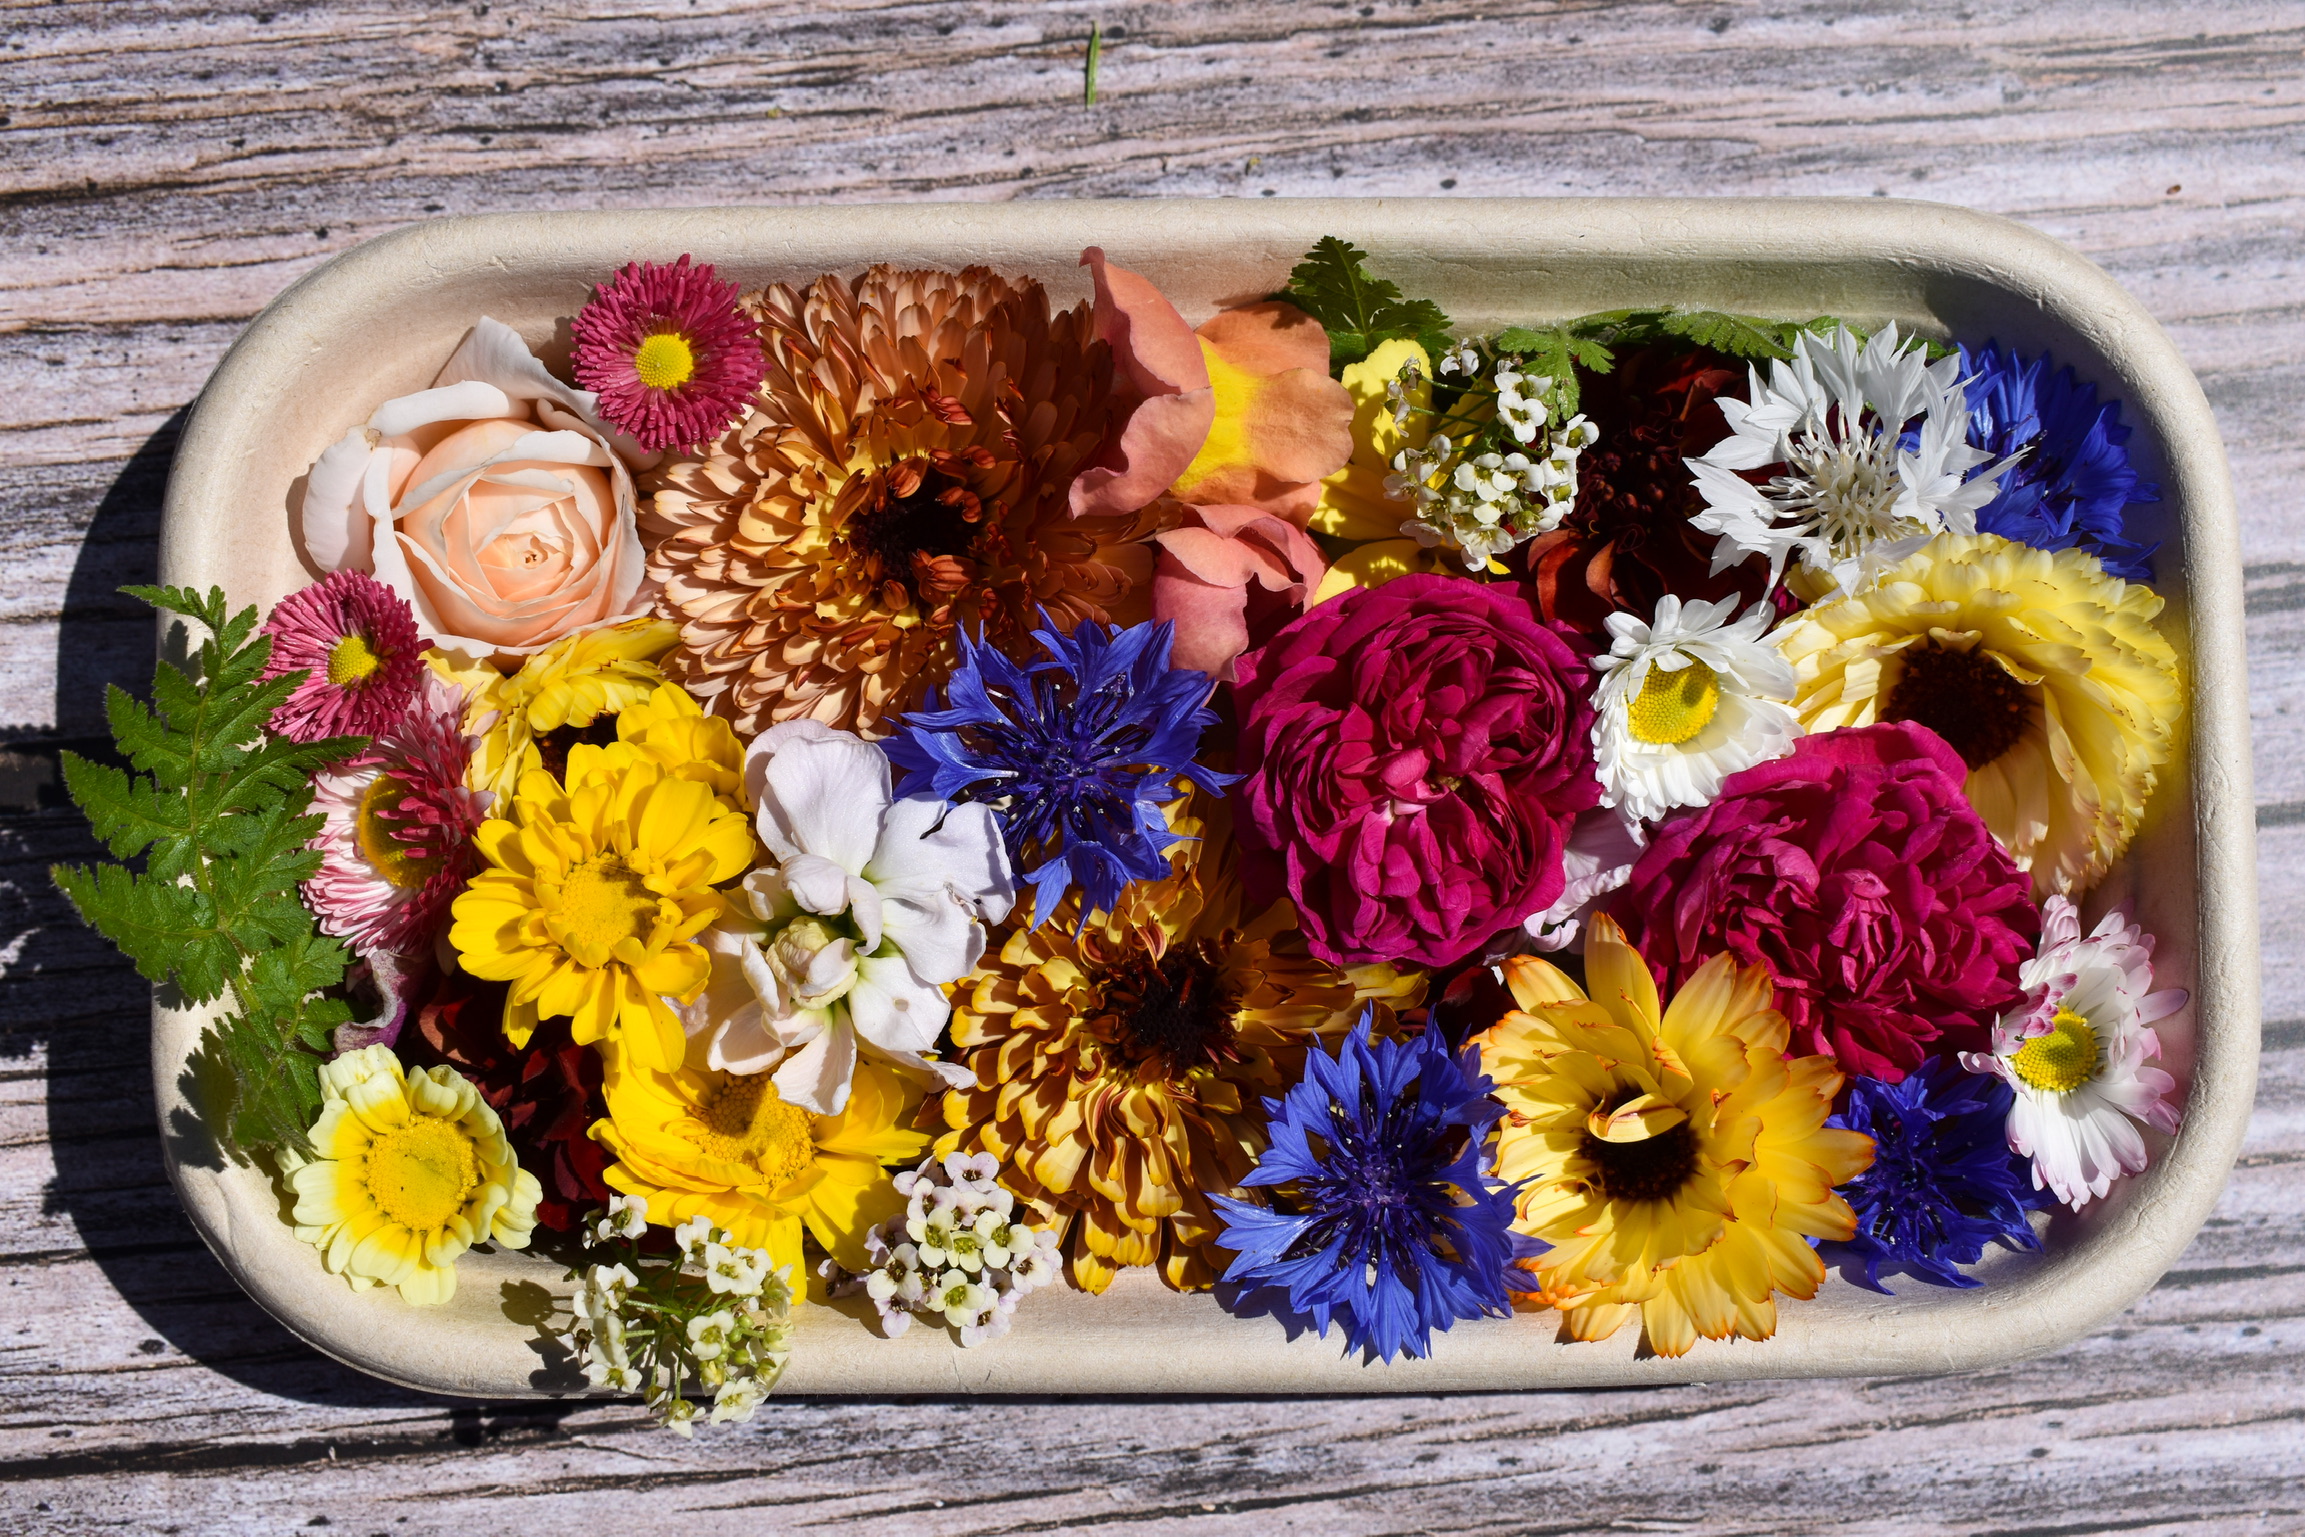 Edible Flowers for Sweet Dishes